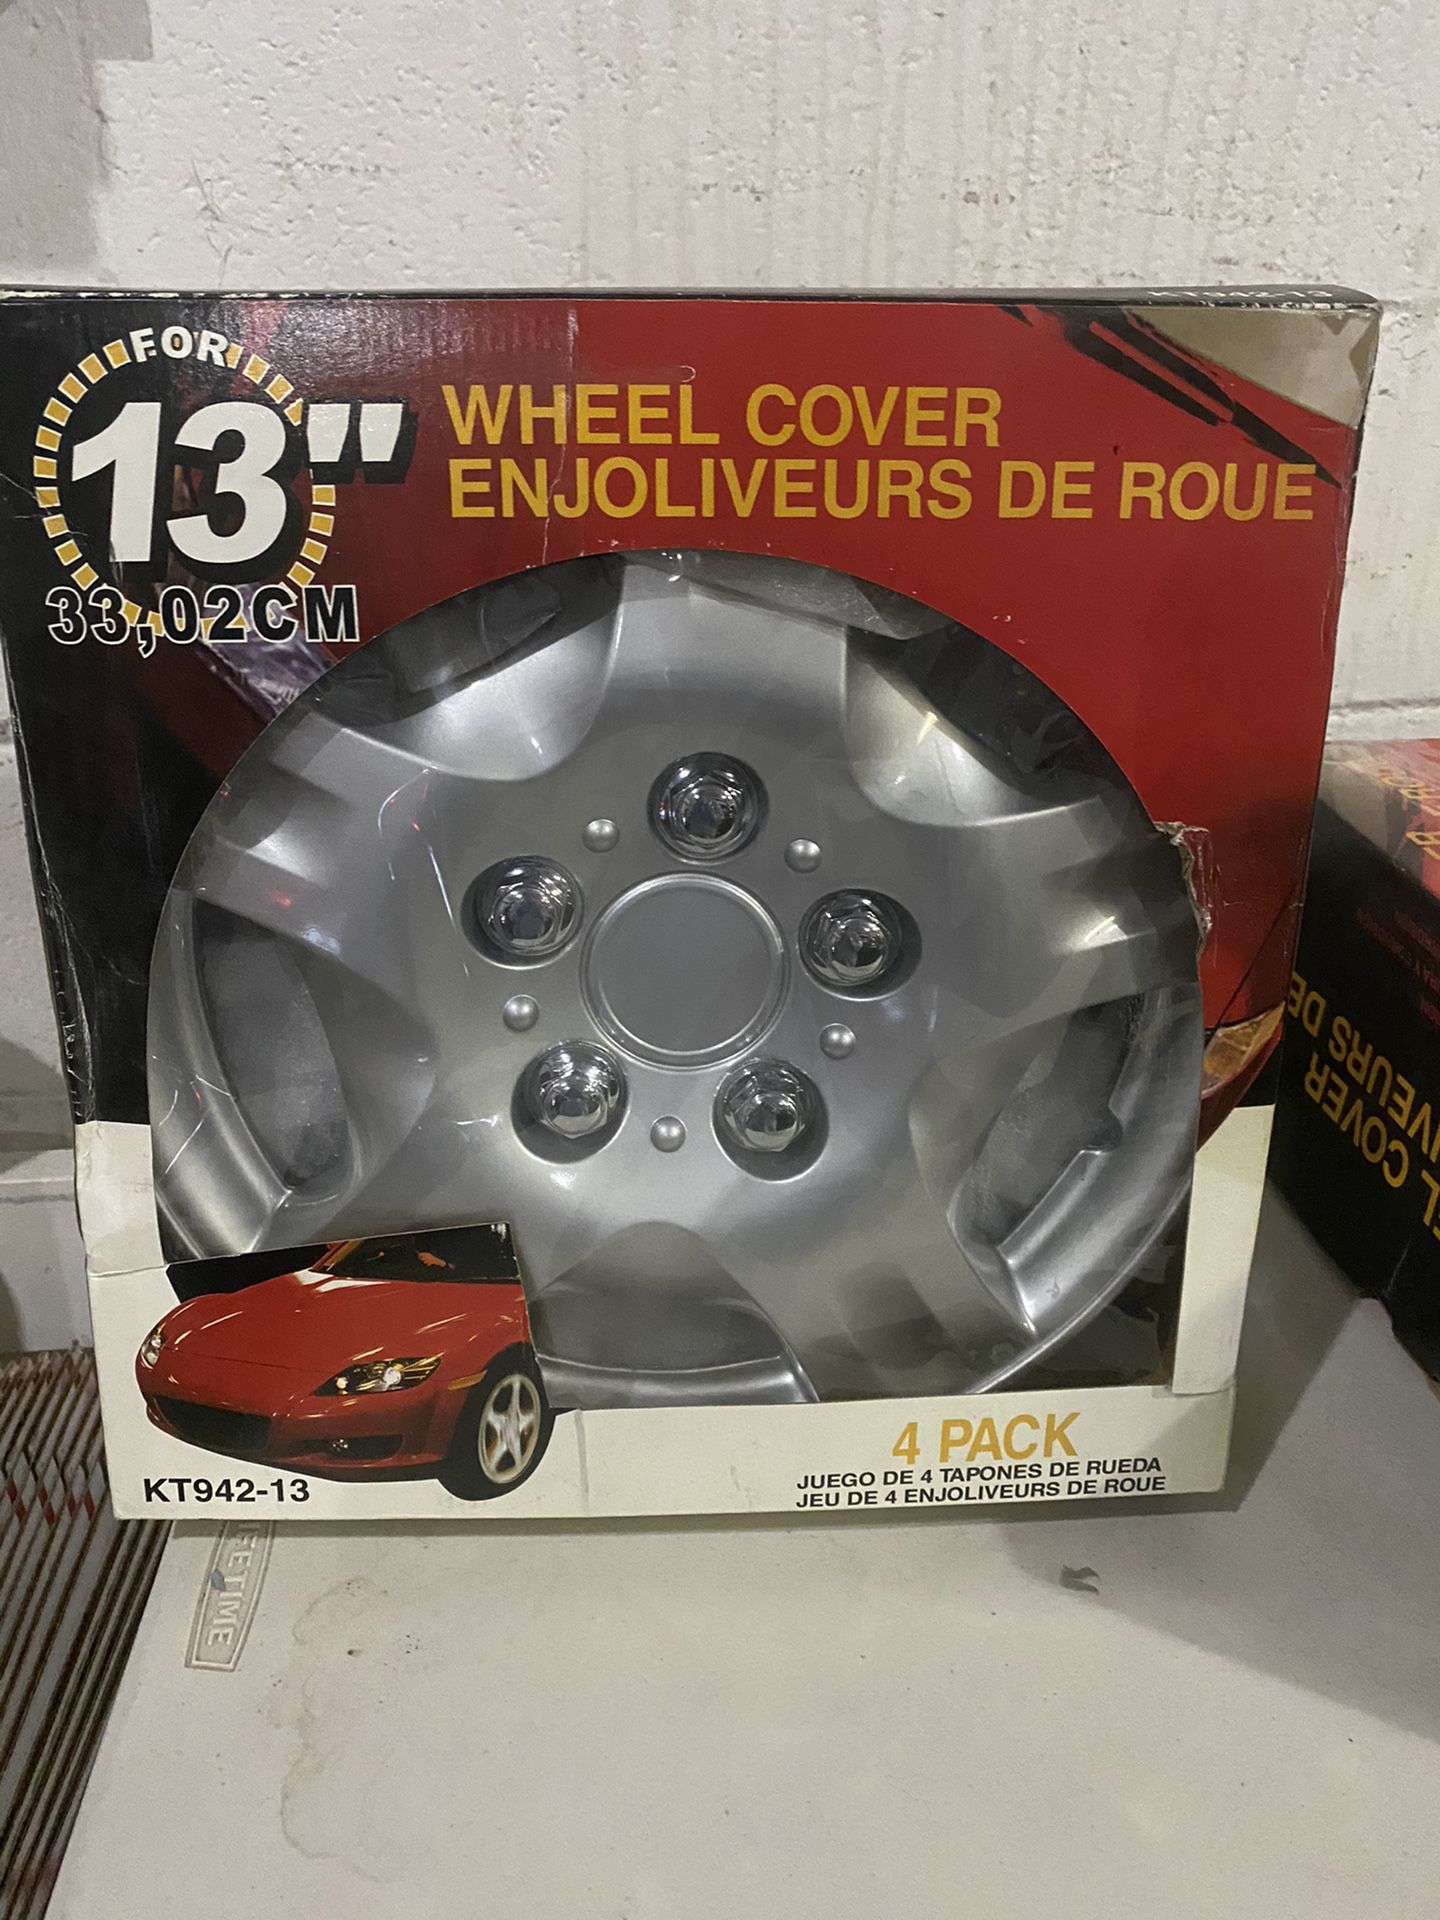 13” ABS Wheel Covers KT-942-13